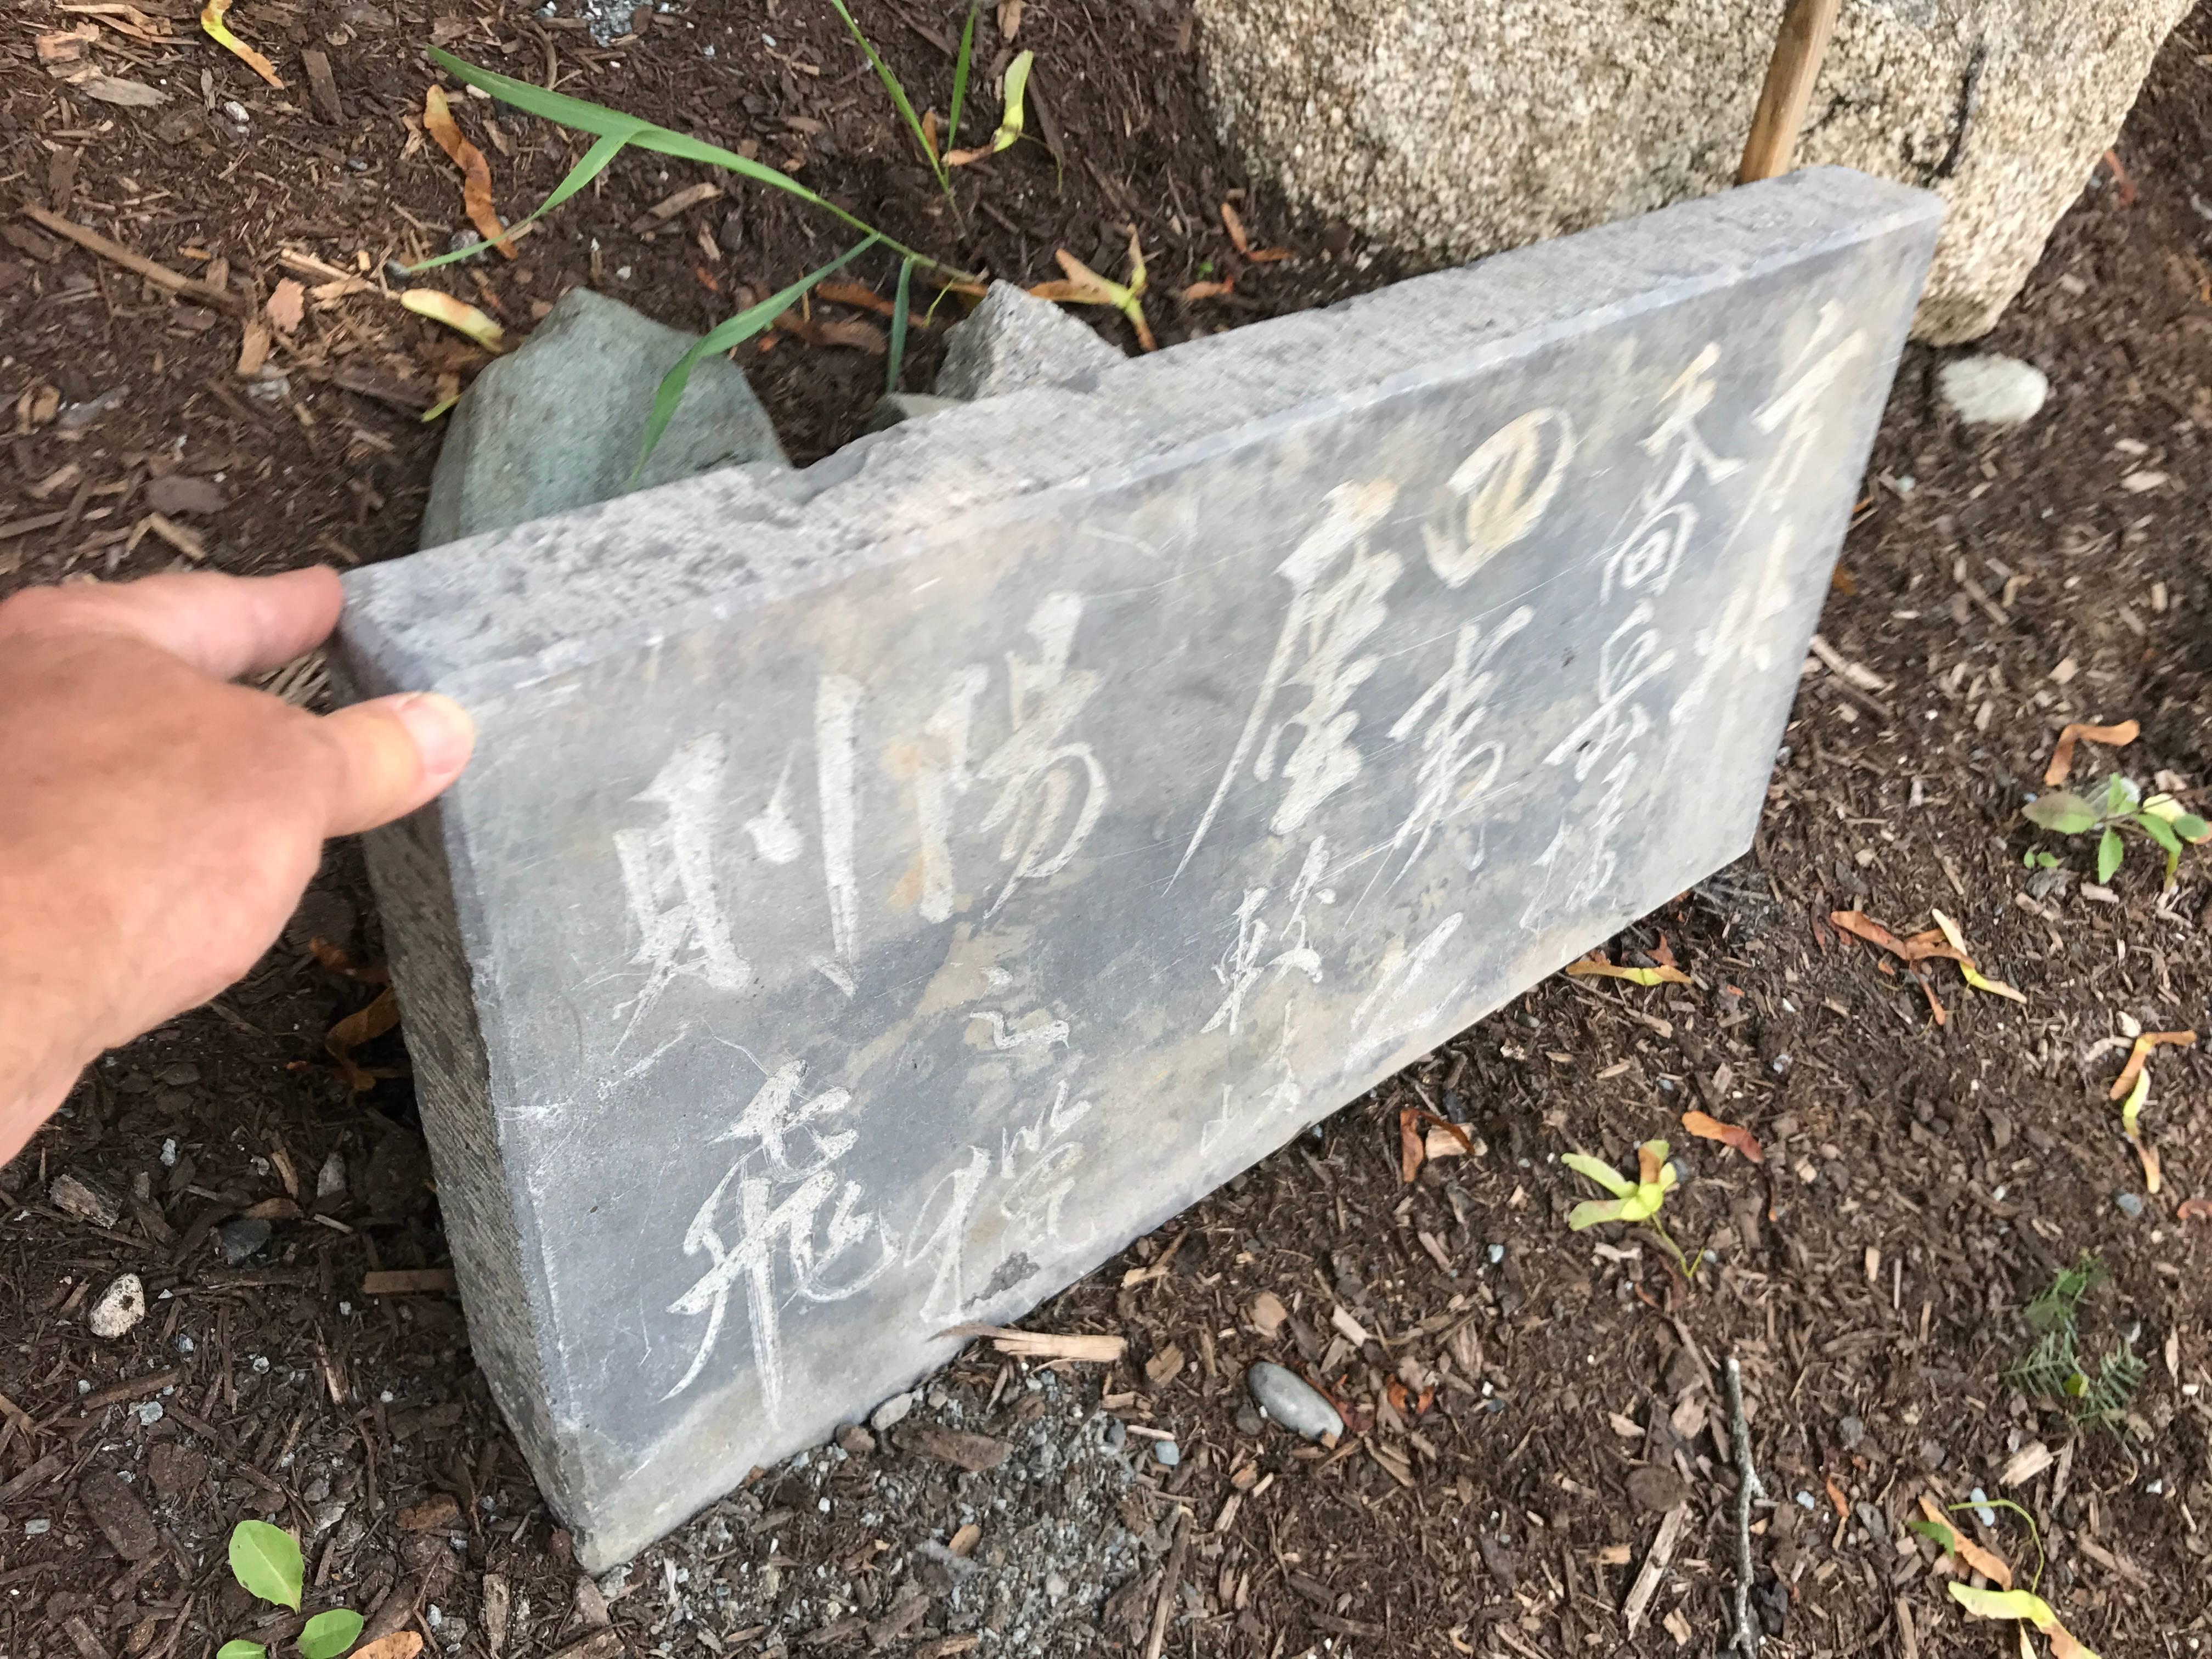 An antique chinese calligraphy brush work style stone panel hand-carved in limestone.

Beautifully executed.

Dimensions: 12.5 inches tall and 25 inches width

Provenance: old Chinese collection collected in 2002 near Beijing

A good garden